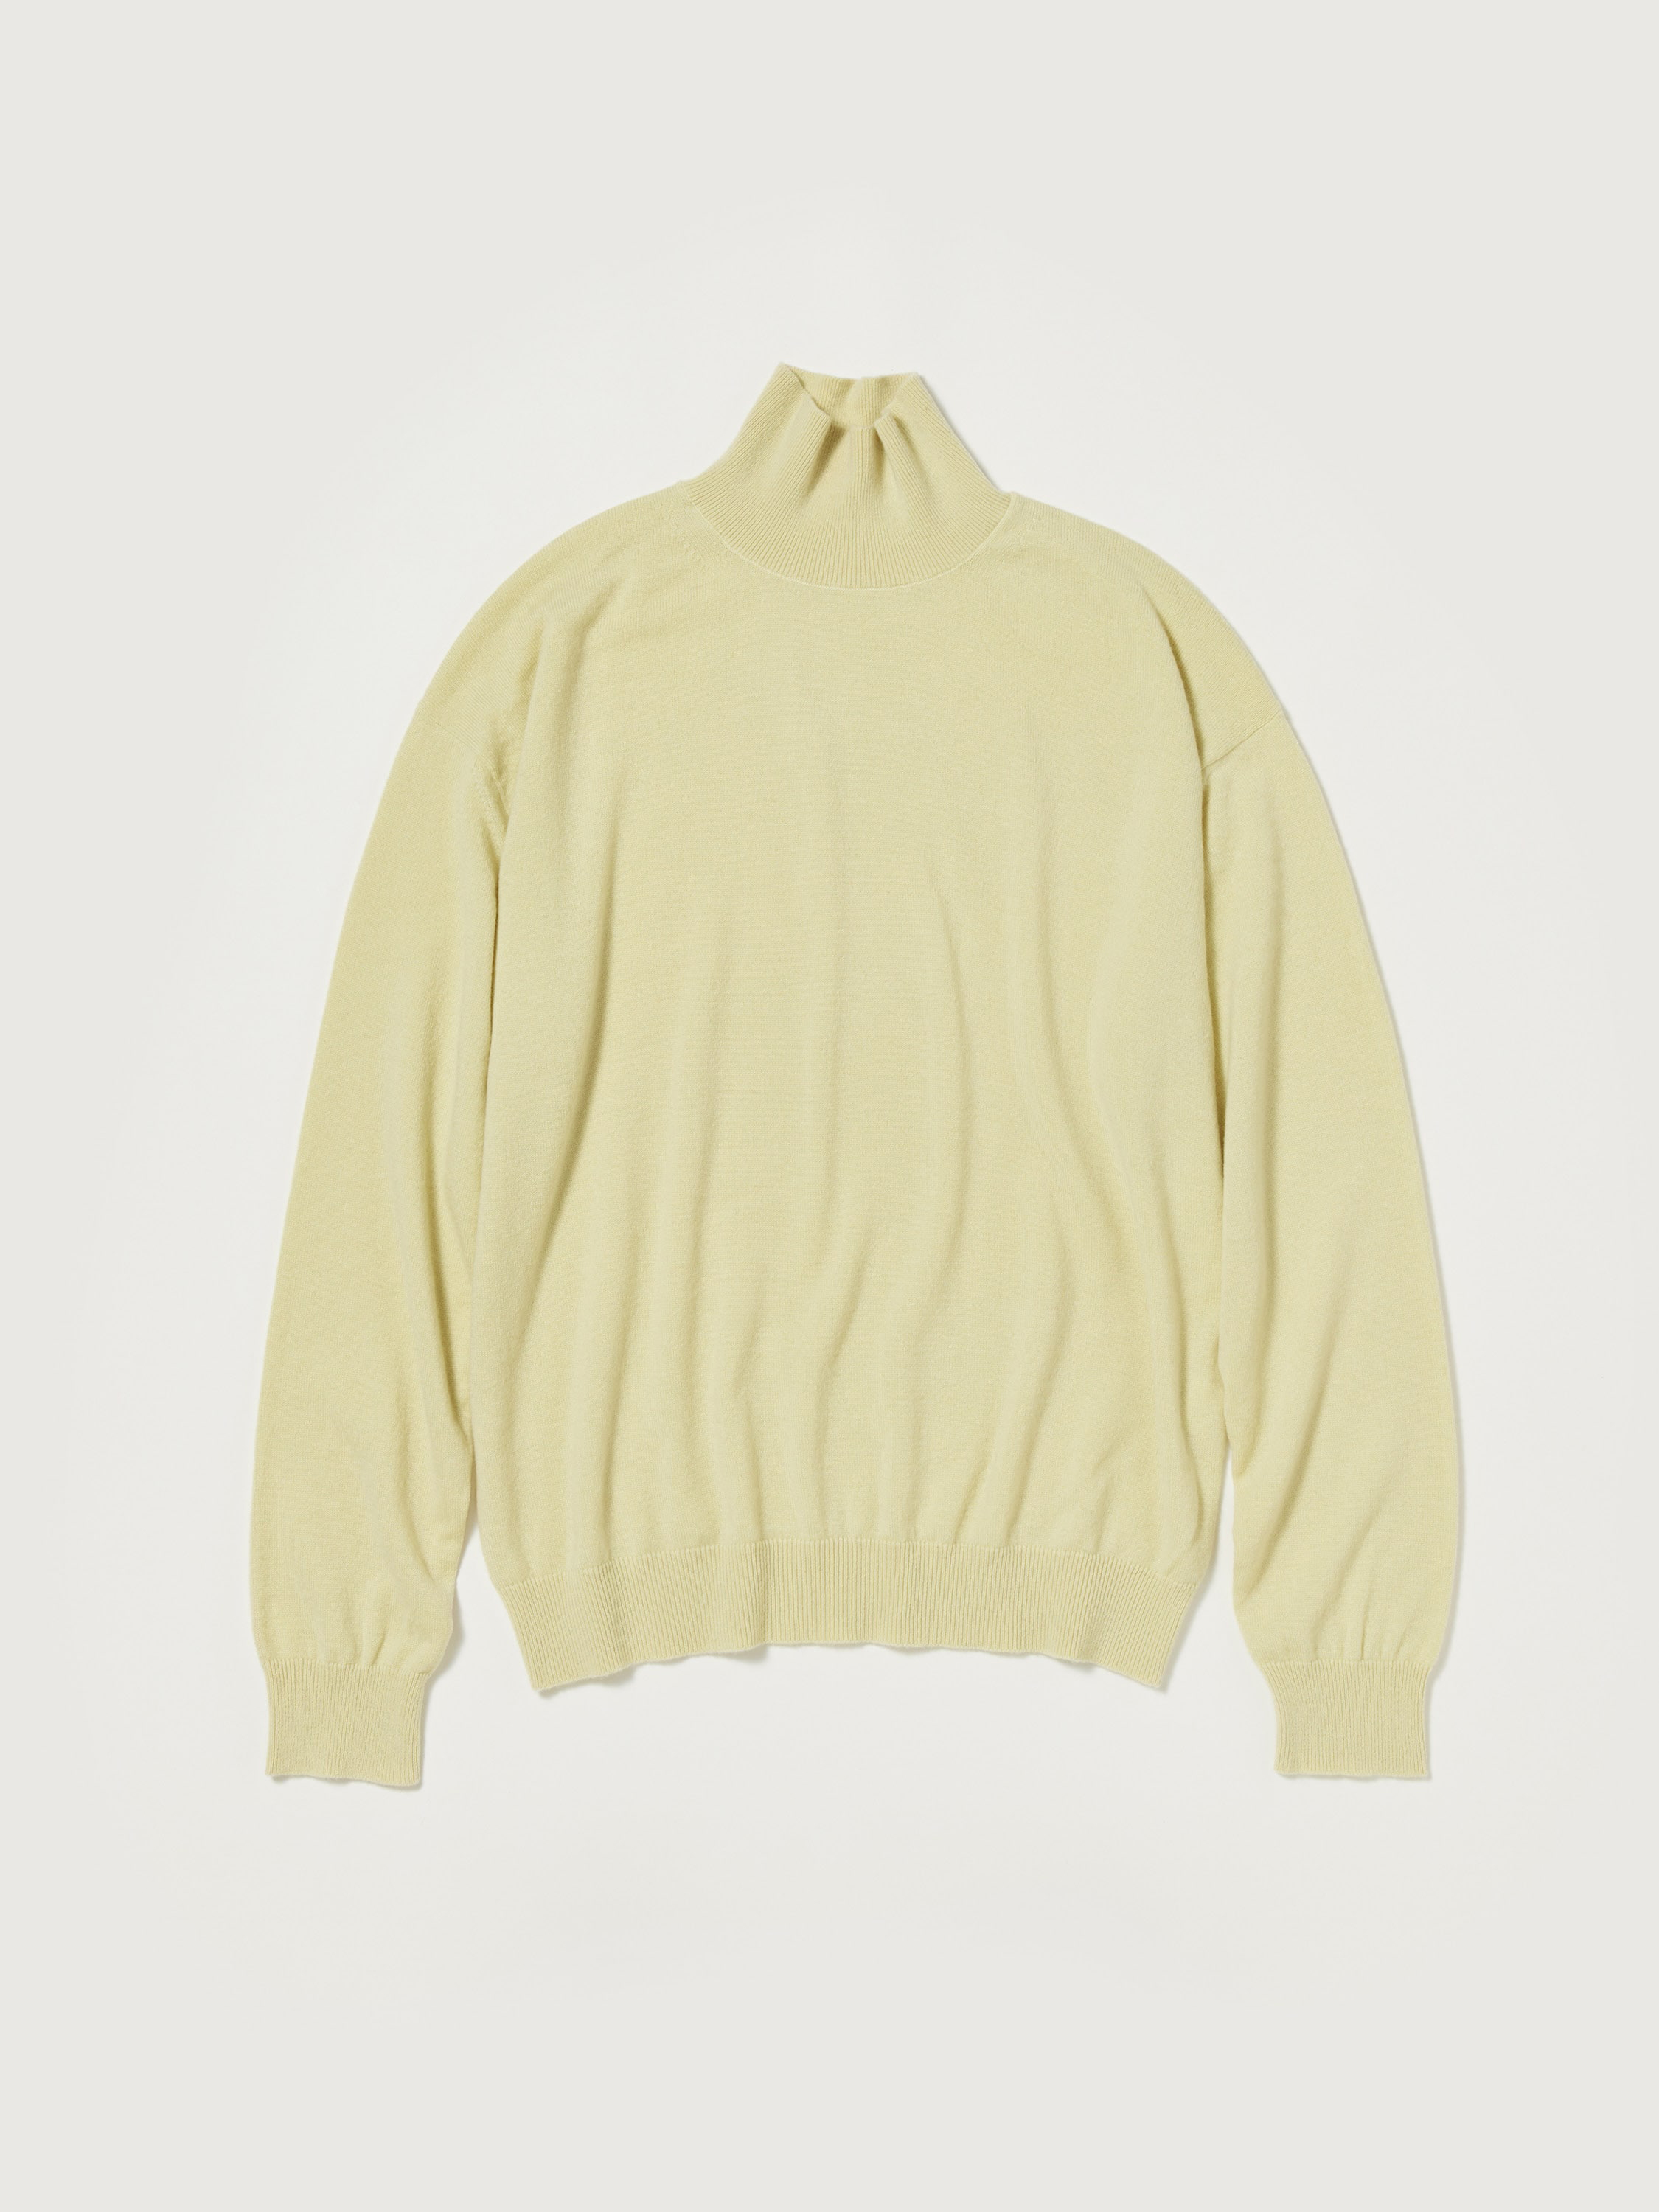 BABY CASHMERE KNIT TURTLE 詳細画像 TOP LIGHT YELLOW 1